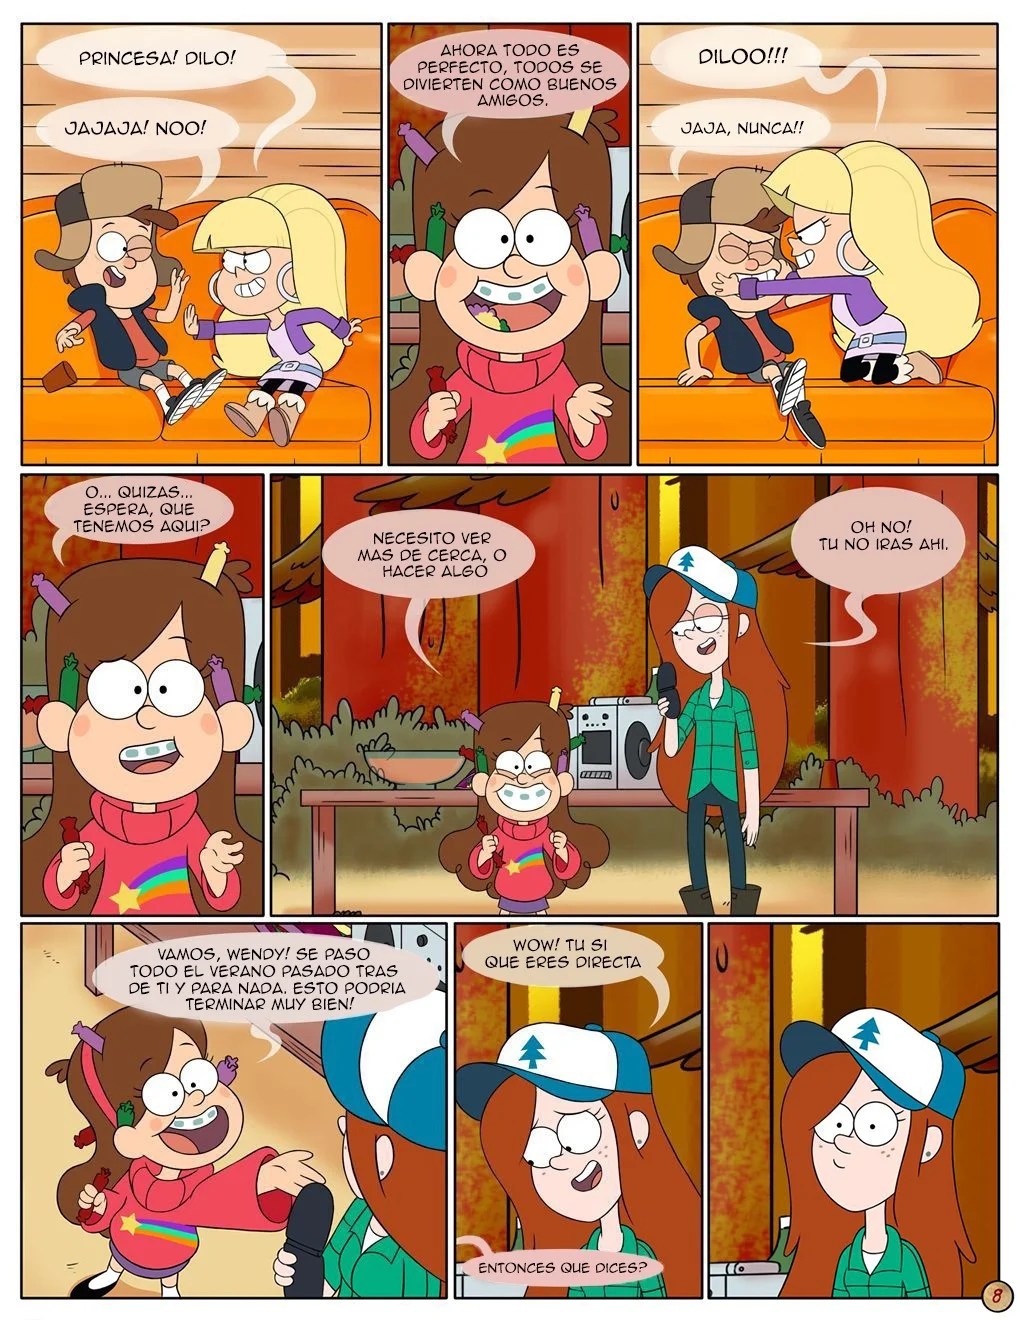 Next Summer – Gravity Falls - 60acee8ab7cacb755a890221ce0d3c78